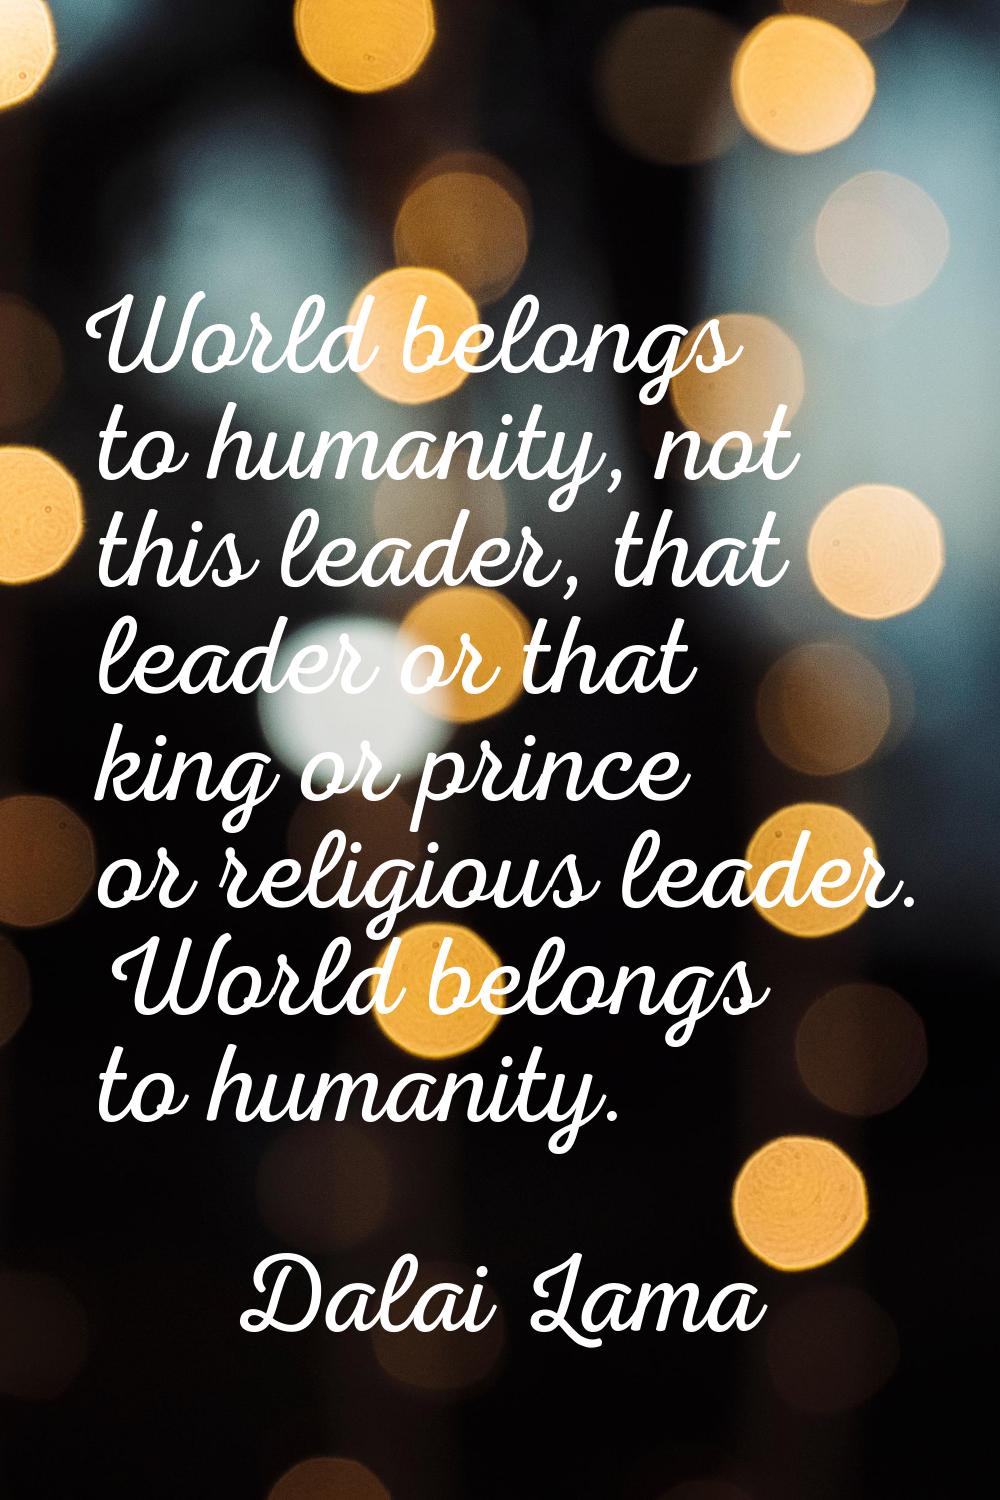 World belongs to humanity, not this leader, that leader or that king or prince or religious leader.